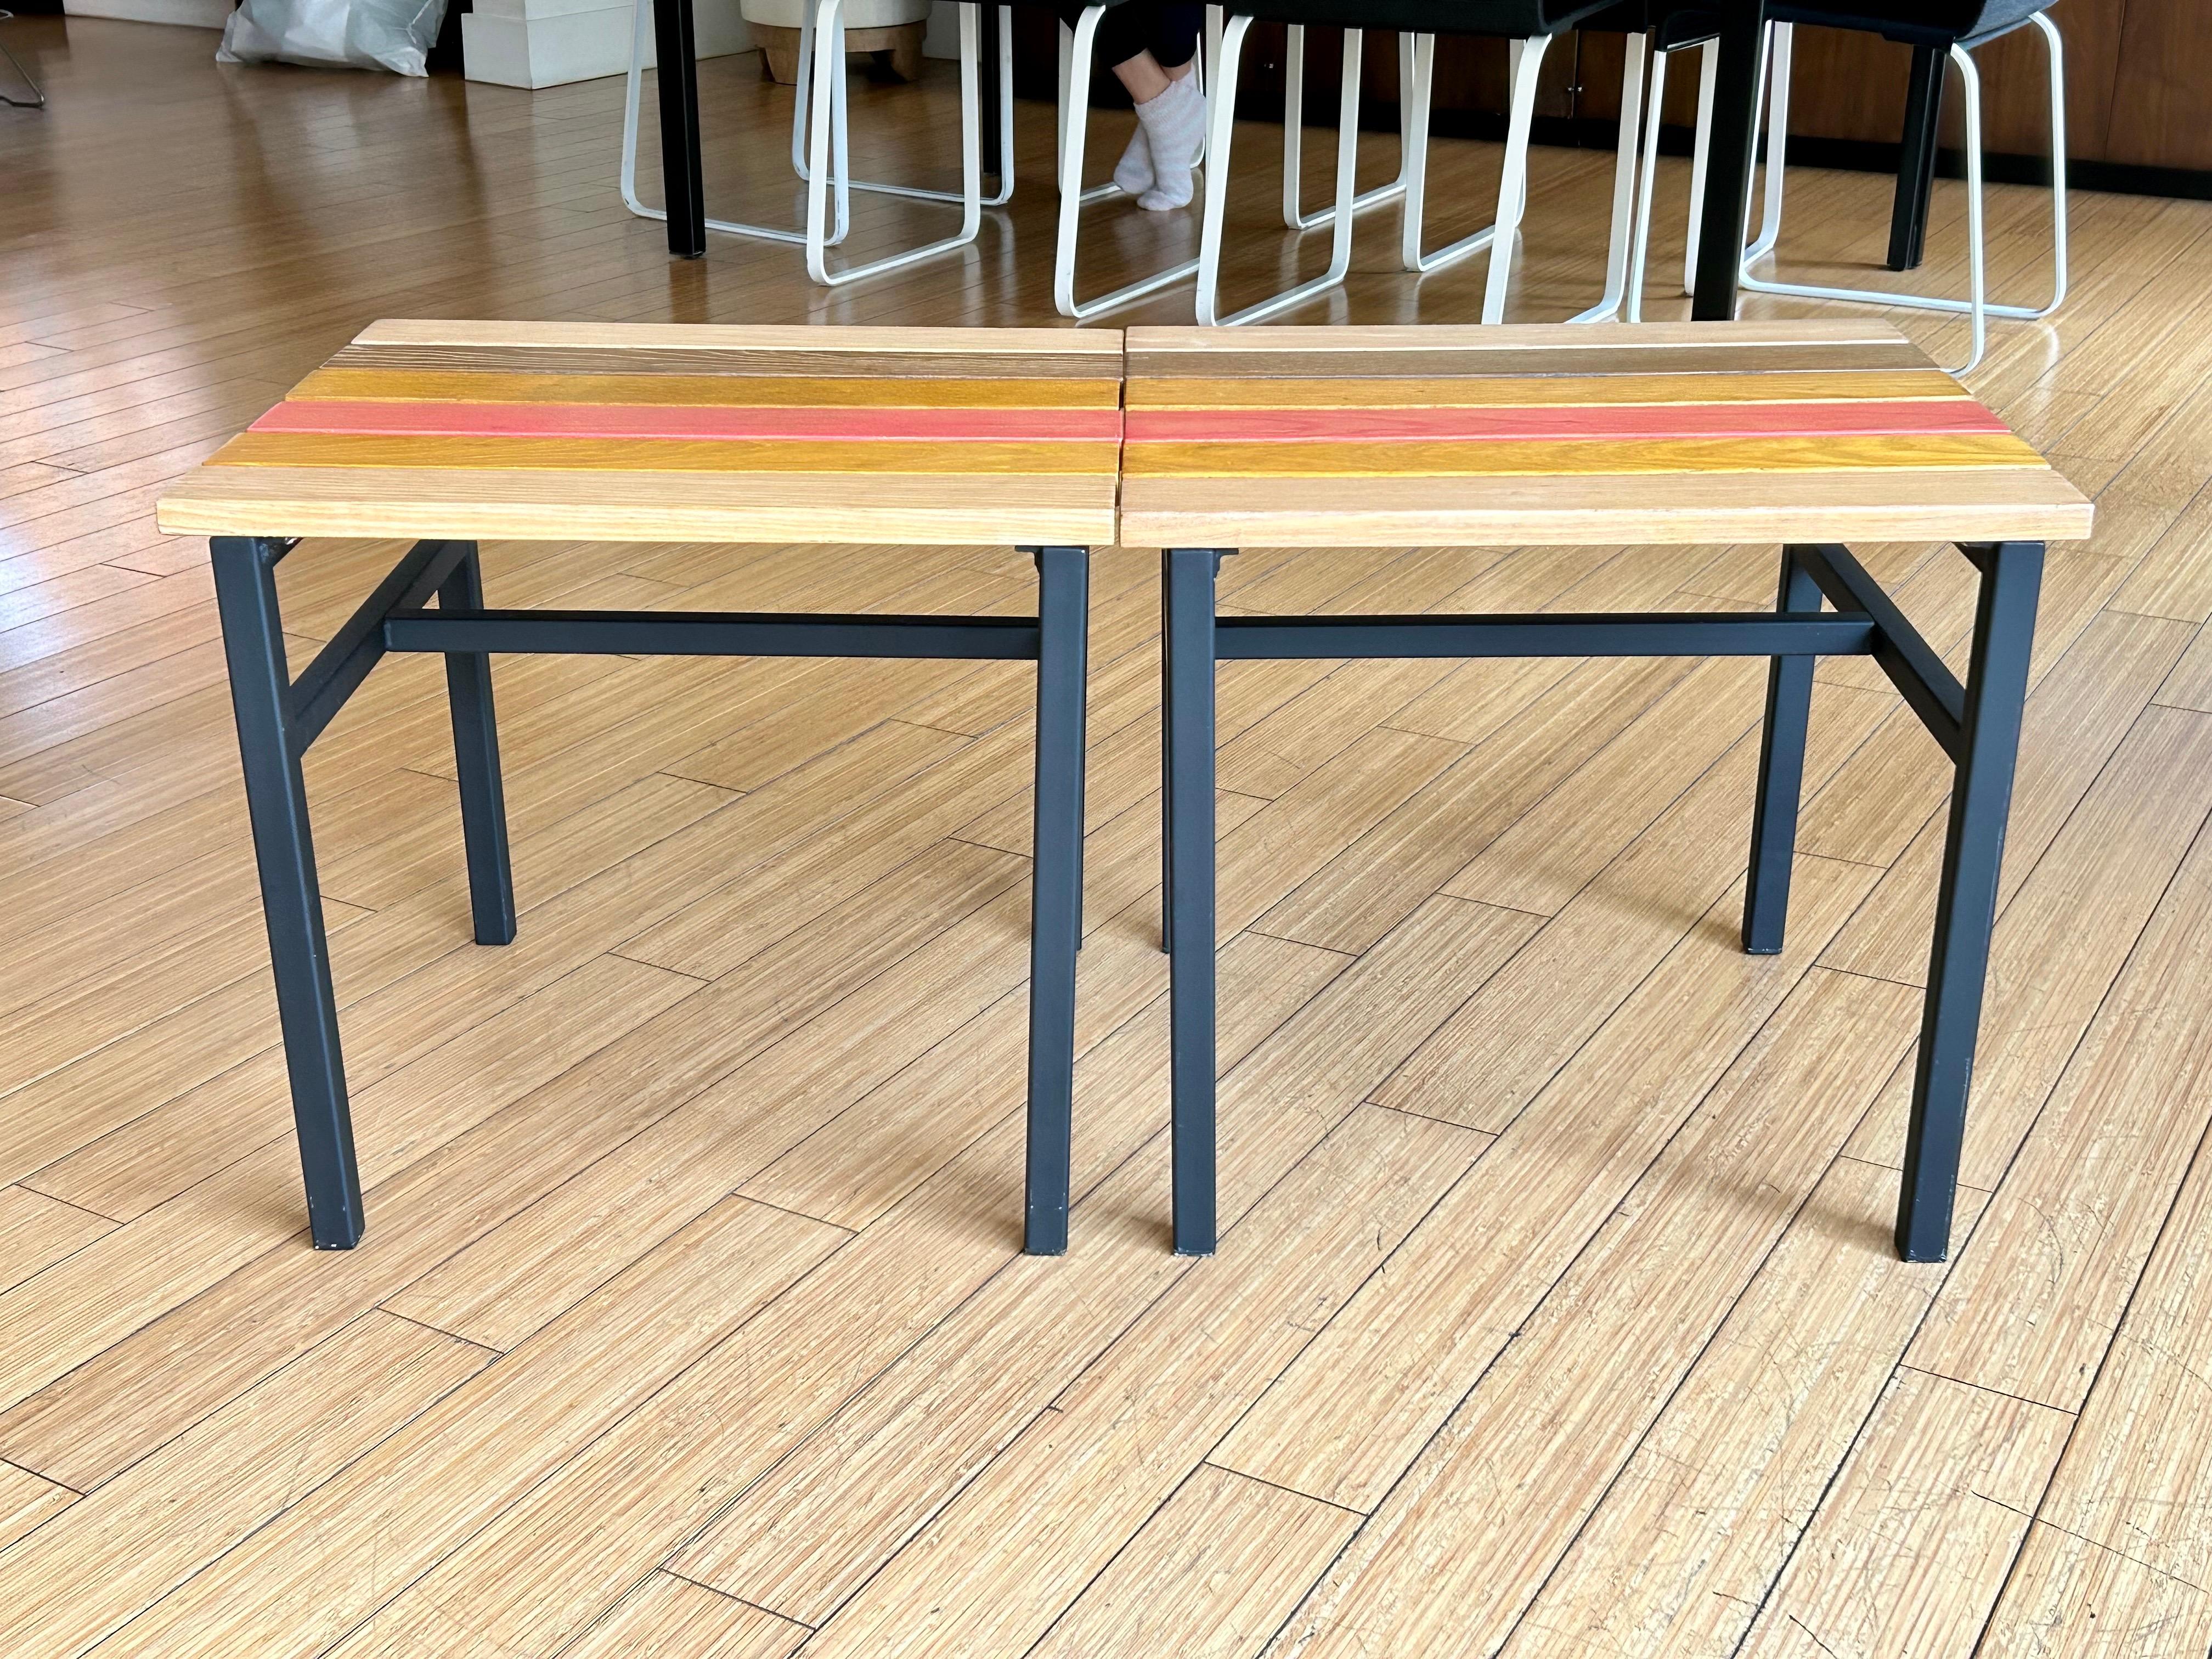  Occasional Tables or Bench Van Keppel Green  In Good Condition For Sale In Los Angeles, CA